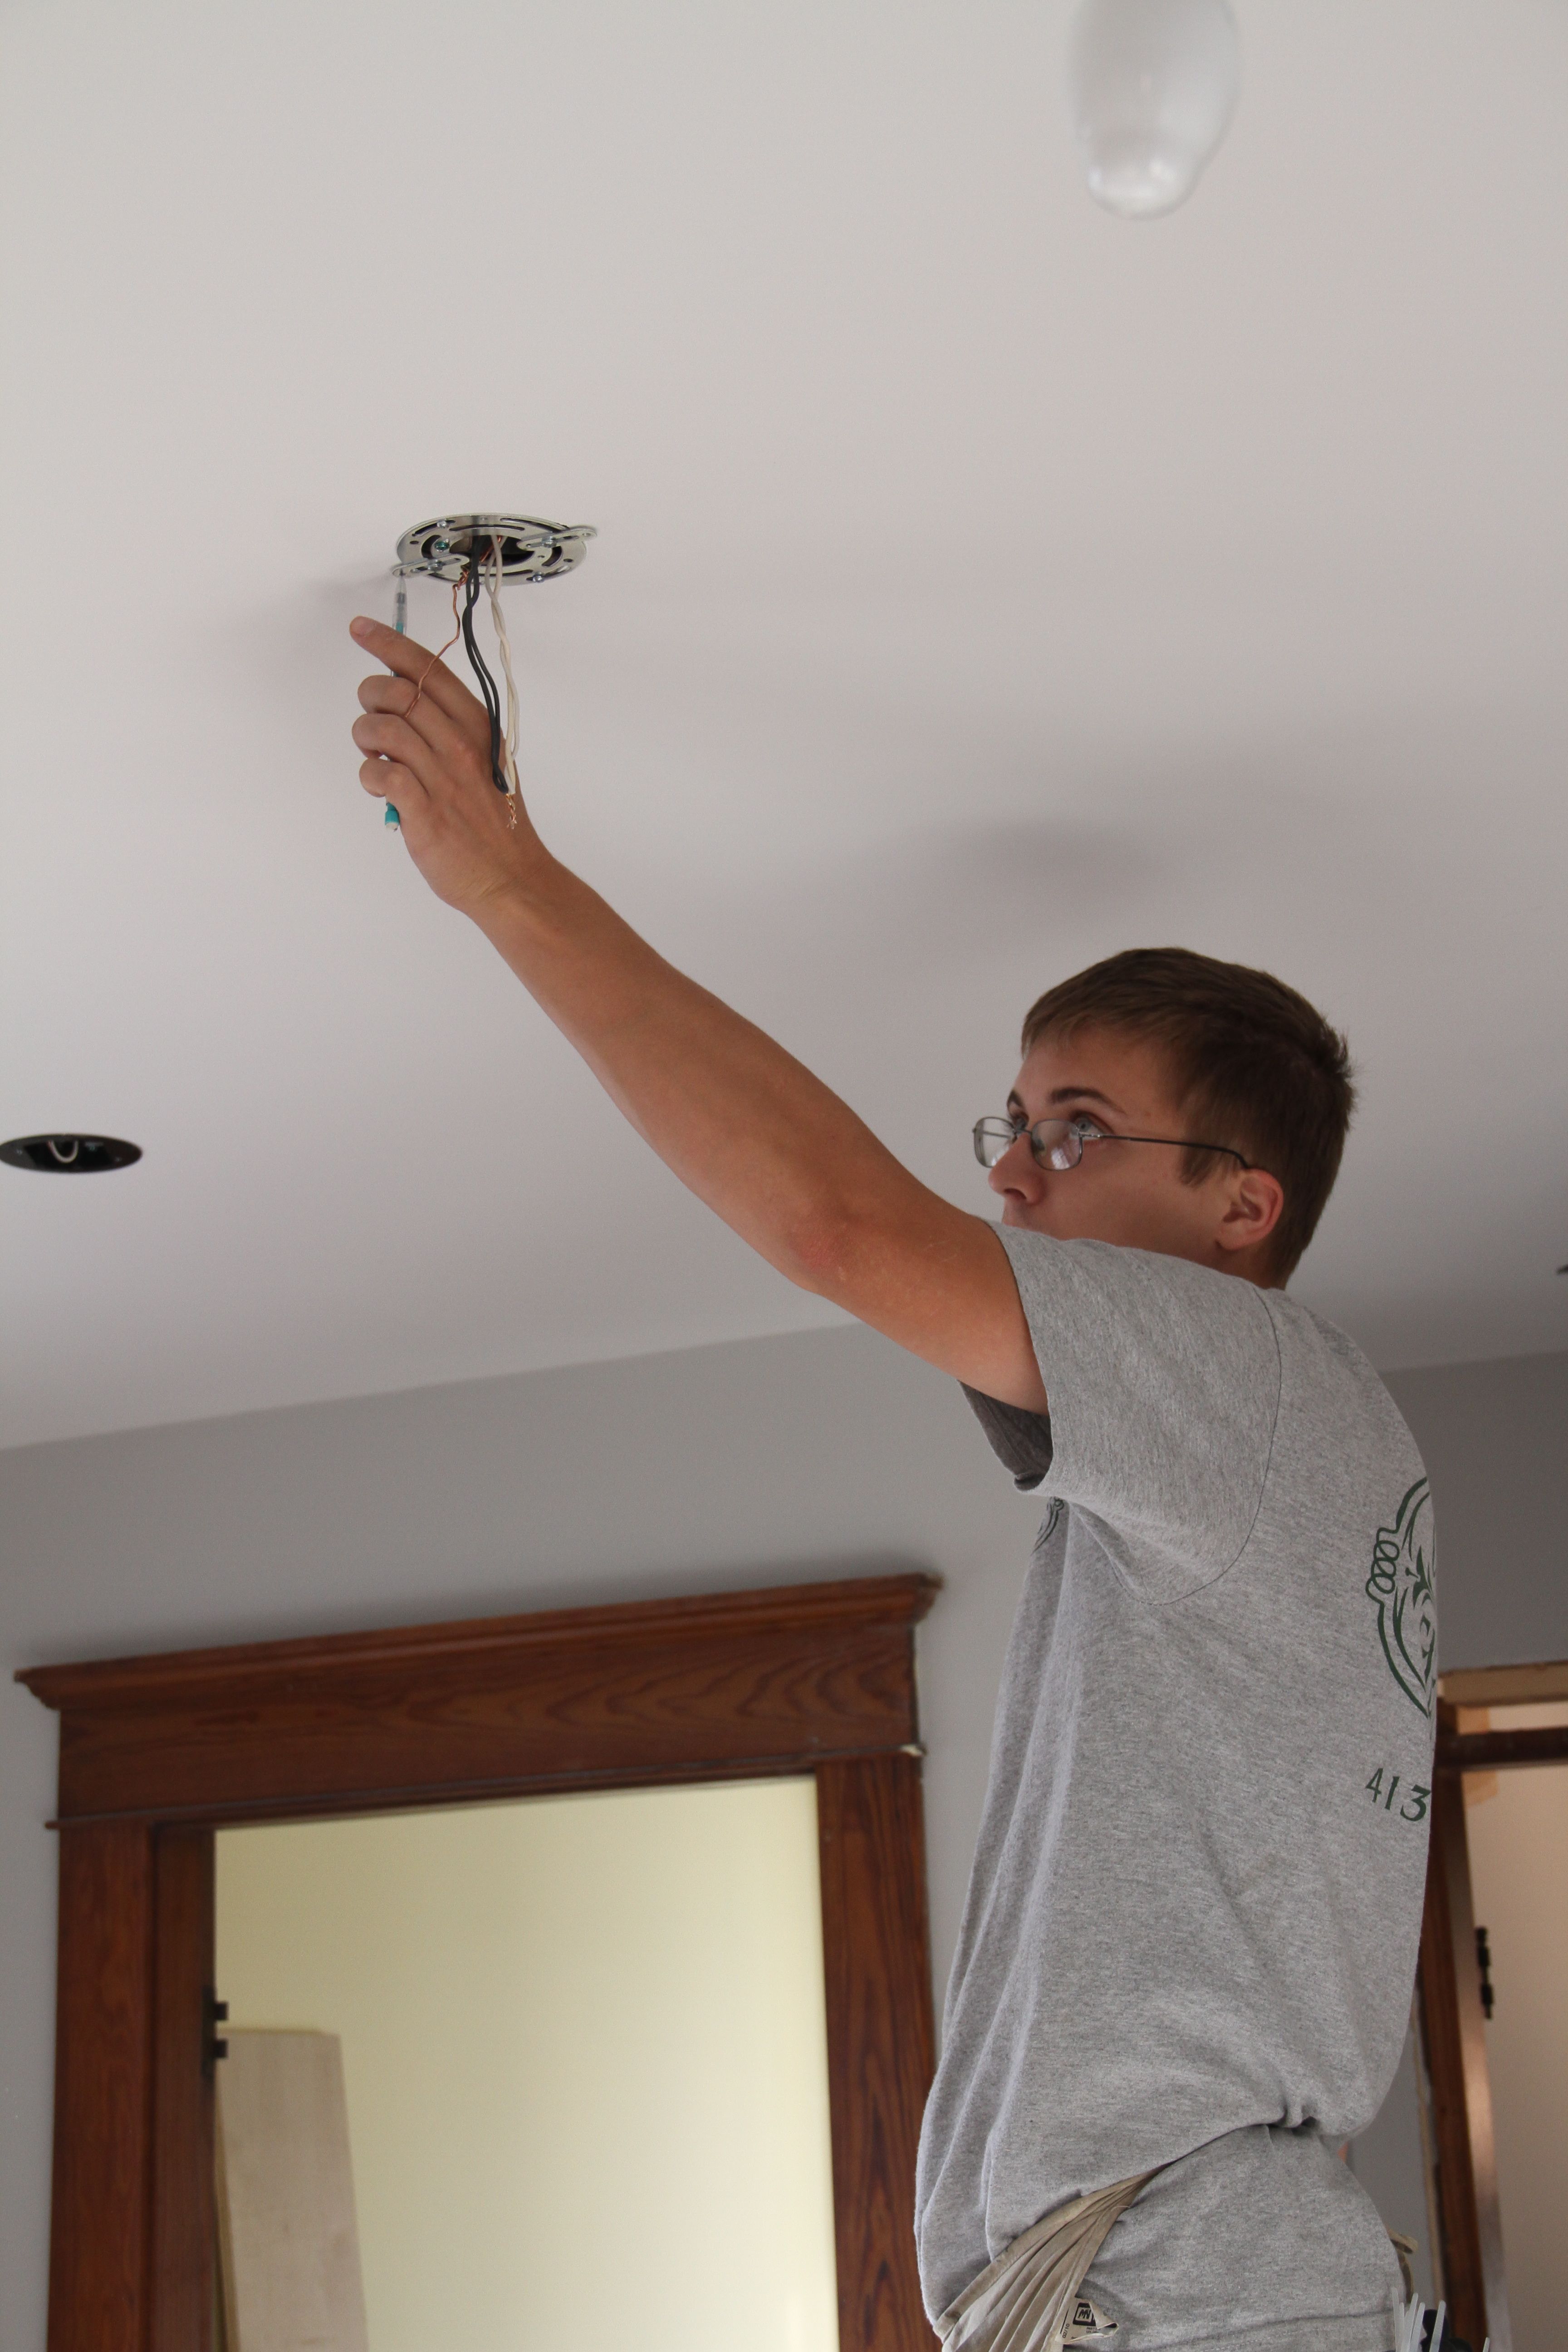 Eric working on installing the pendant fixtures.